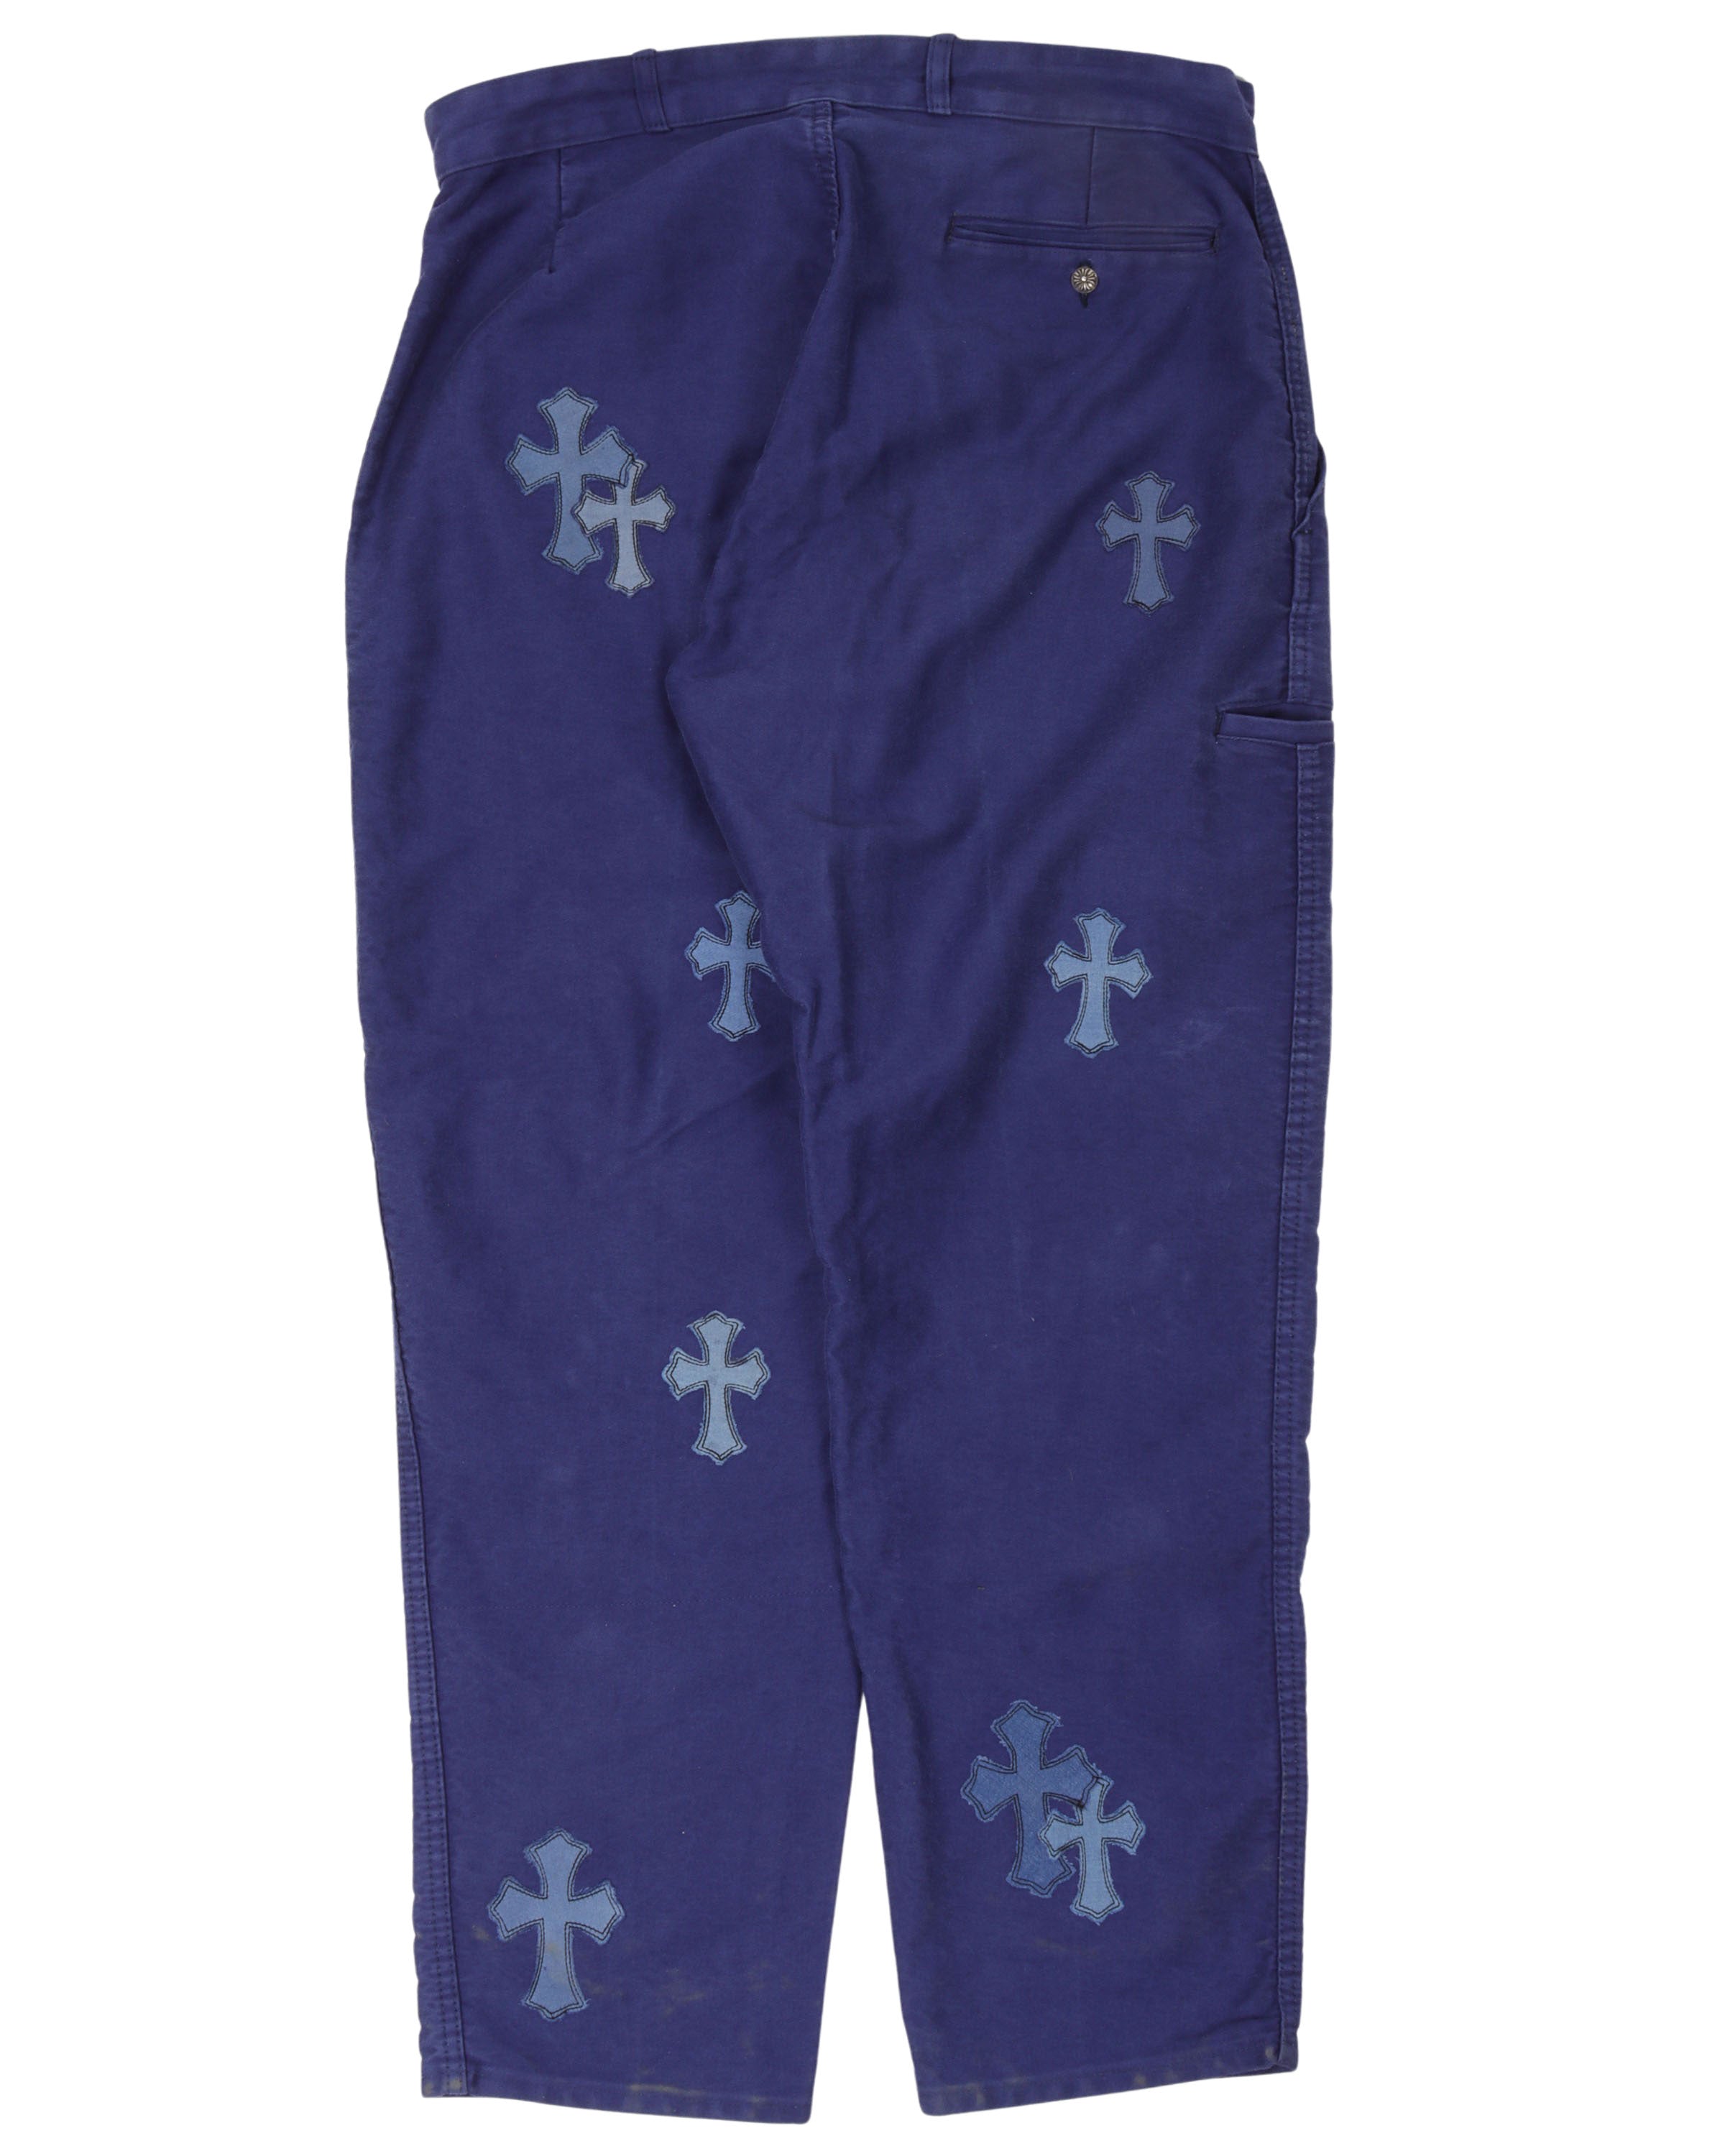 Leather Cross French Work Pants